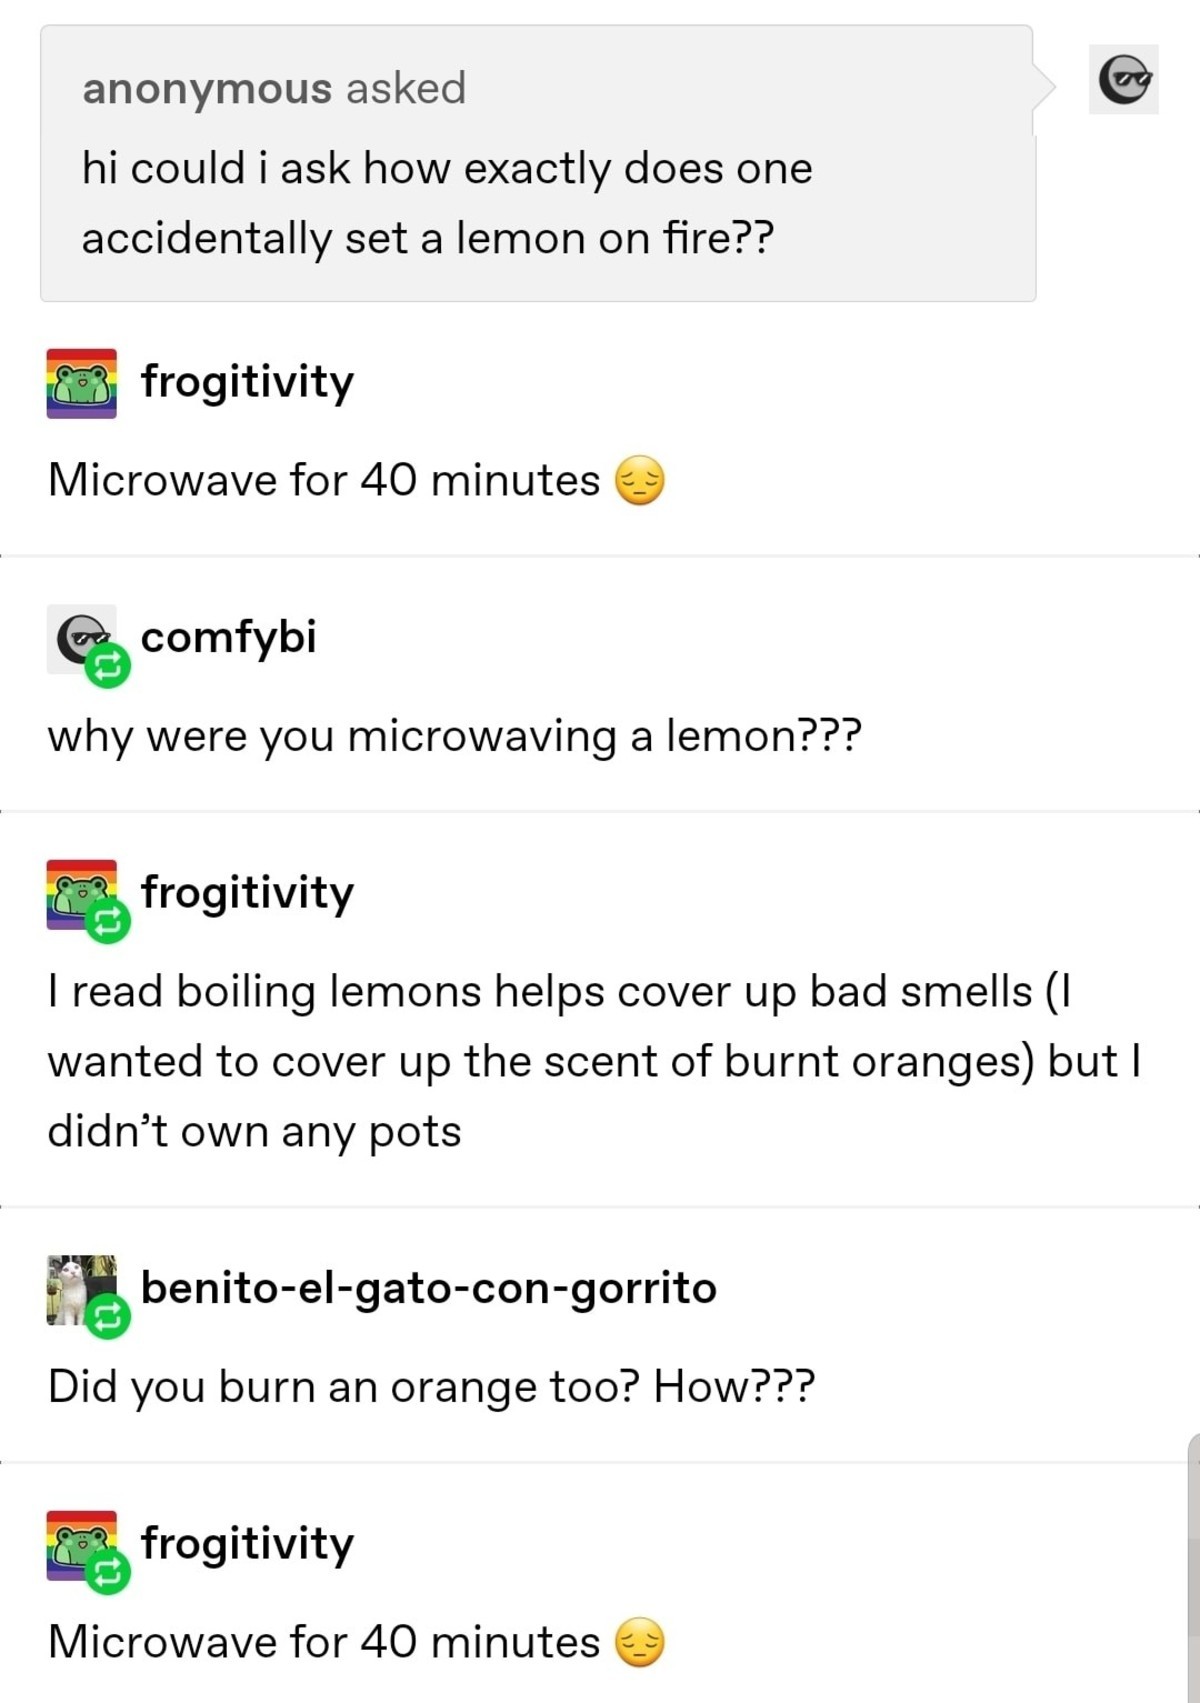 angle - anonymous asked hi could i ask how exactly does one accidentally set a lemon on fire?? 83 frogitivity Microwave for 40 minutes 3 en comfybi why were you microwaving a lemon??? frogitivity I read boiling lemons helps cover up bad smells 1 wanted to